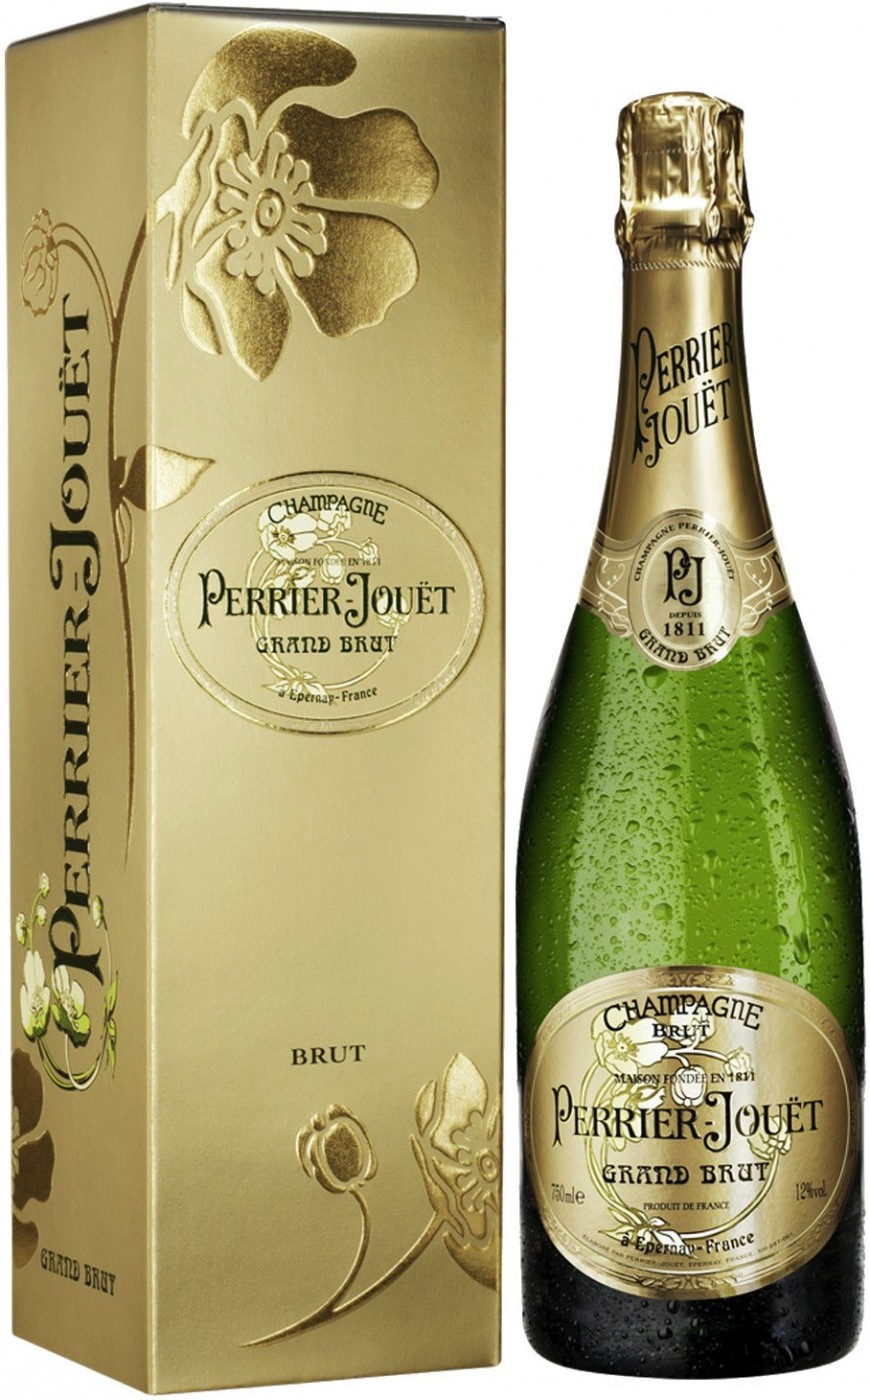 Perrier-Jouet Grand Brut Champagne gift box